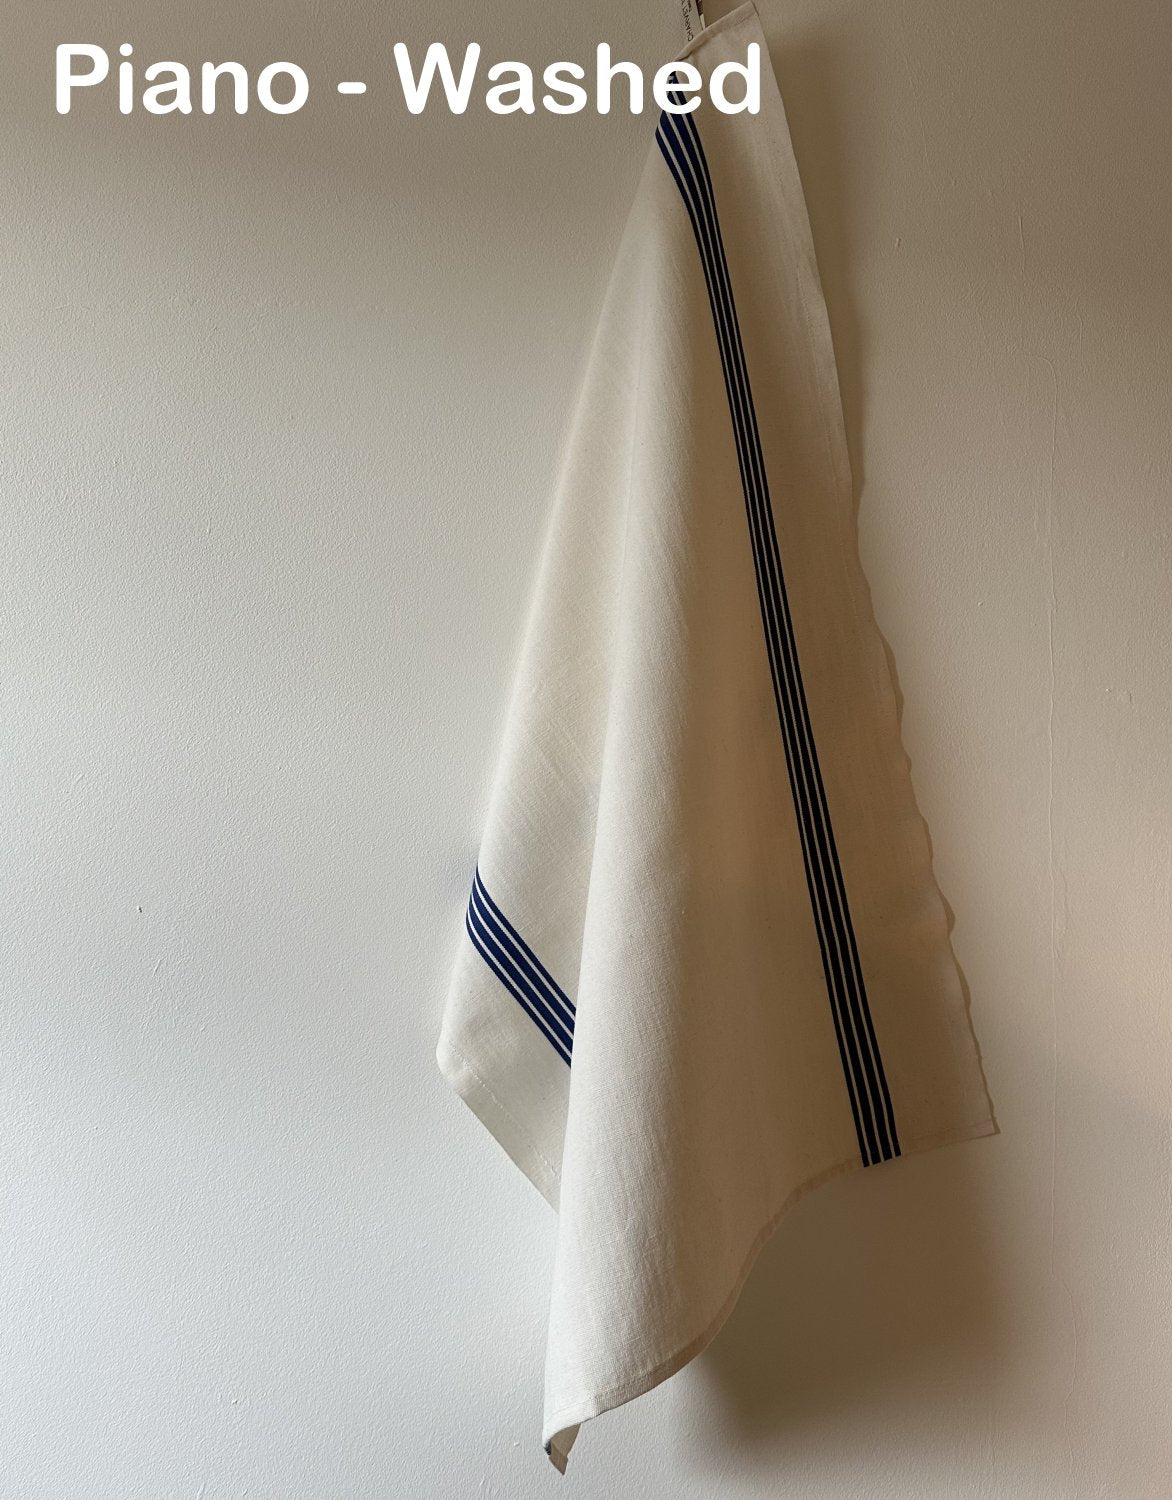 Charvet Editions "Piano" (Blue), Washed, woven linen union tea towel. France.